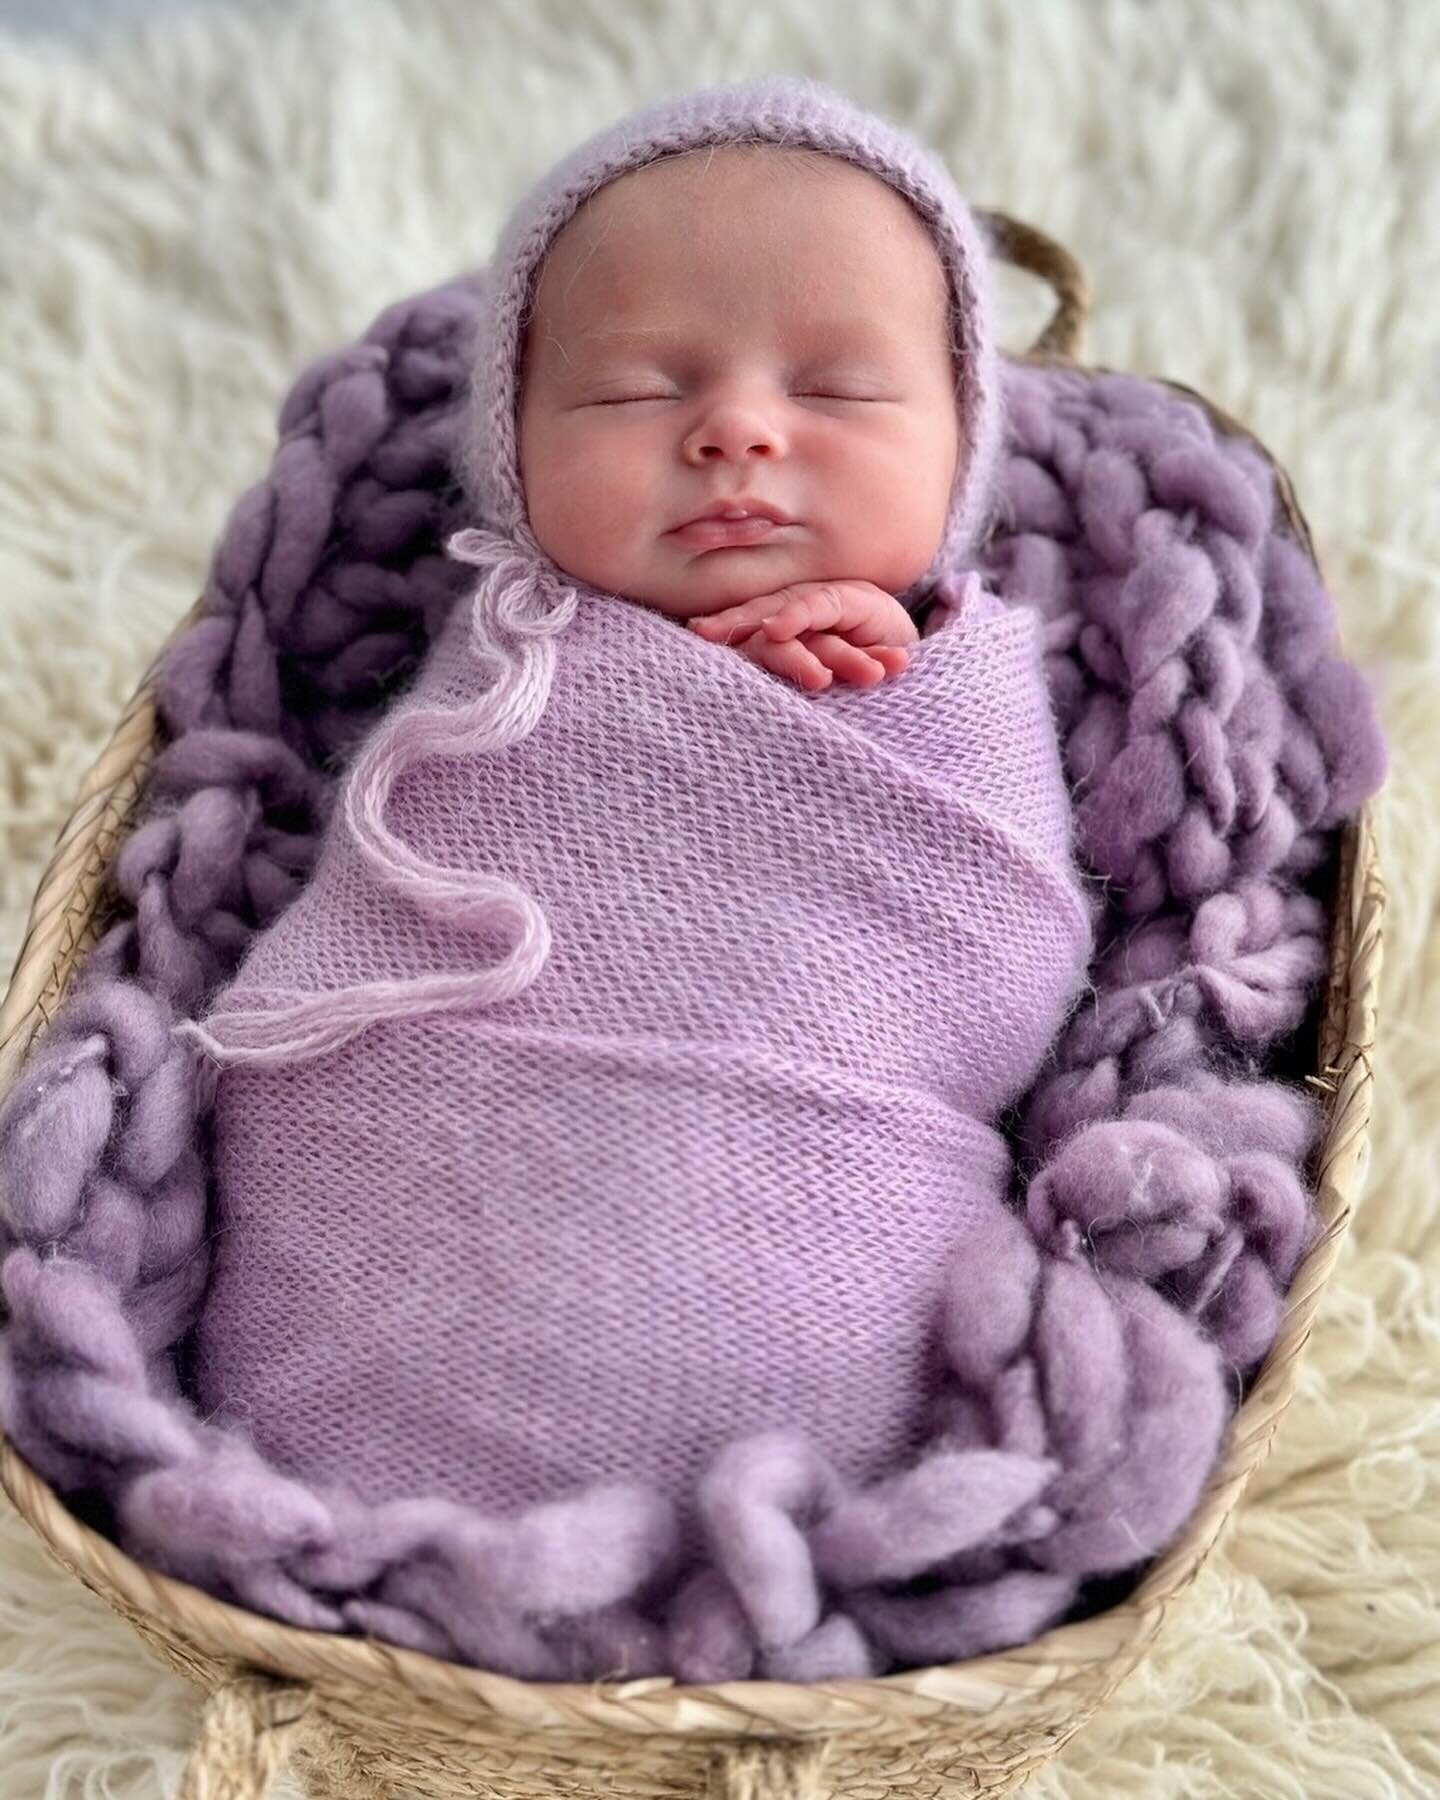 Baby Zahli 👶🏼💖

Gorgeous to see Zahli enjoying her baby spa visit 💖

Another delightful family to care for throughout their pregnancy and birth.

@ky_blackwell 
@sjoggeelong 

#newbornphotography #newborn #family